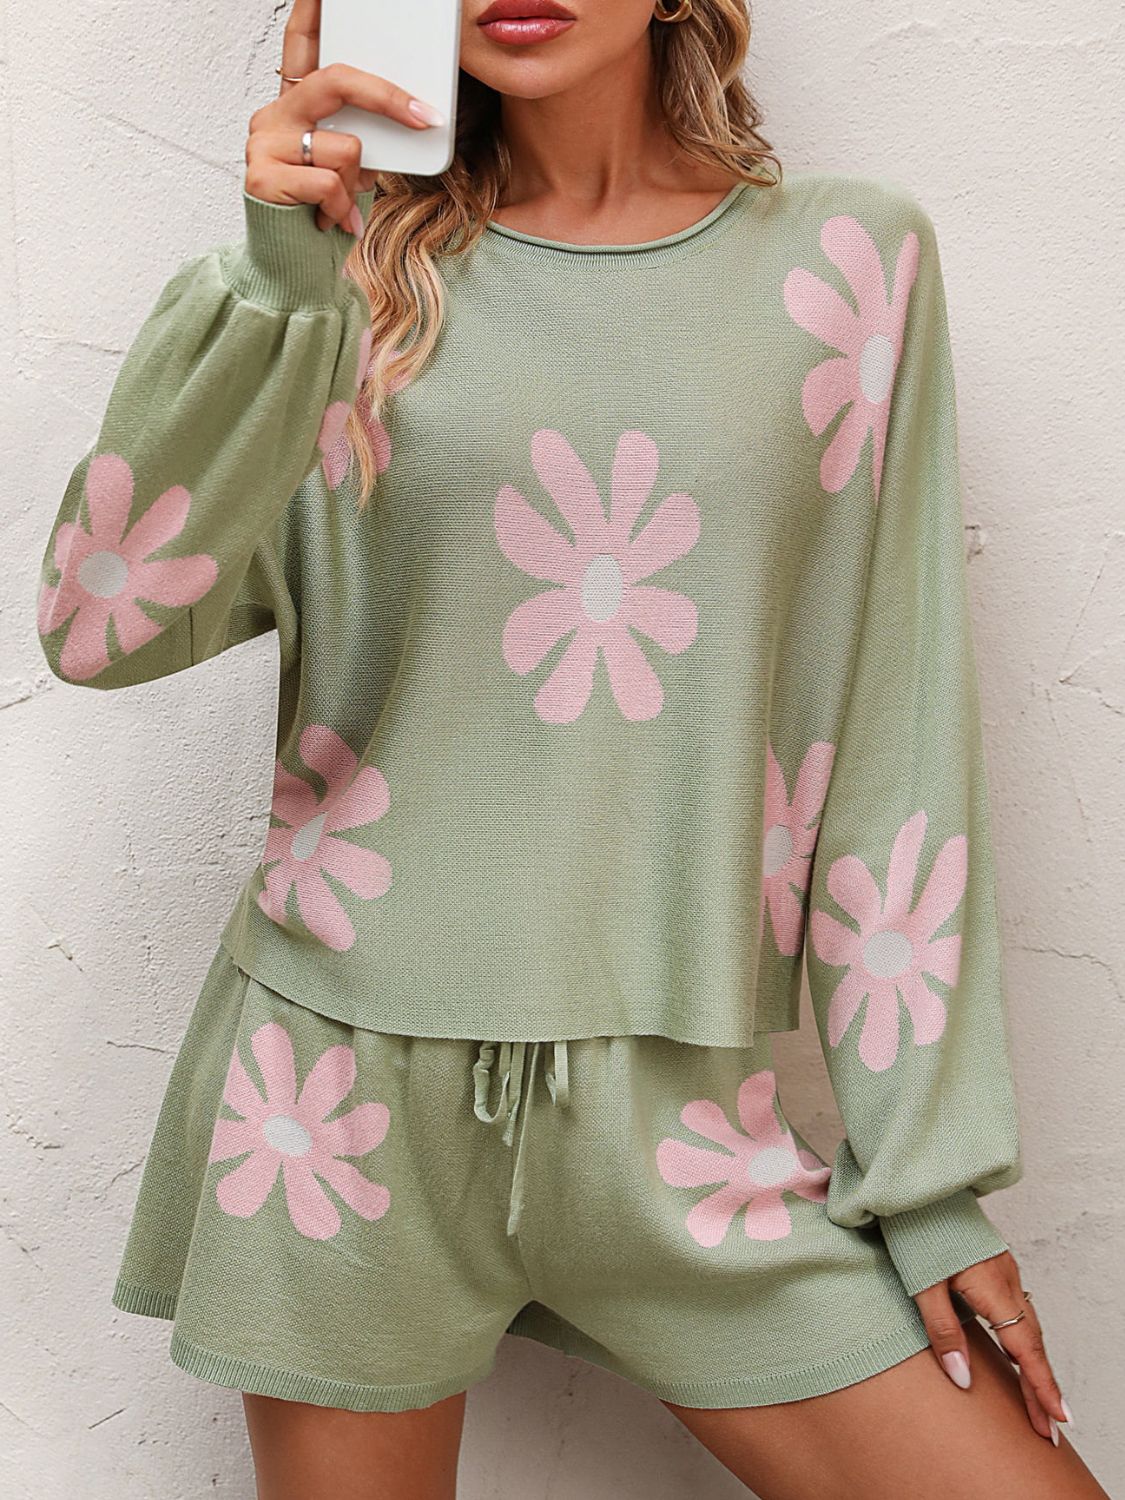 Floral Print Raglan Sleeve Knit Top and Tie Front Sweater Shorts Set free shipping -Oh Em Gee Boutique